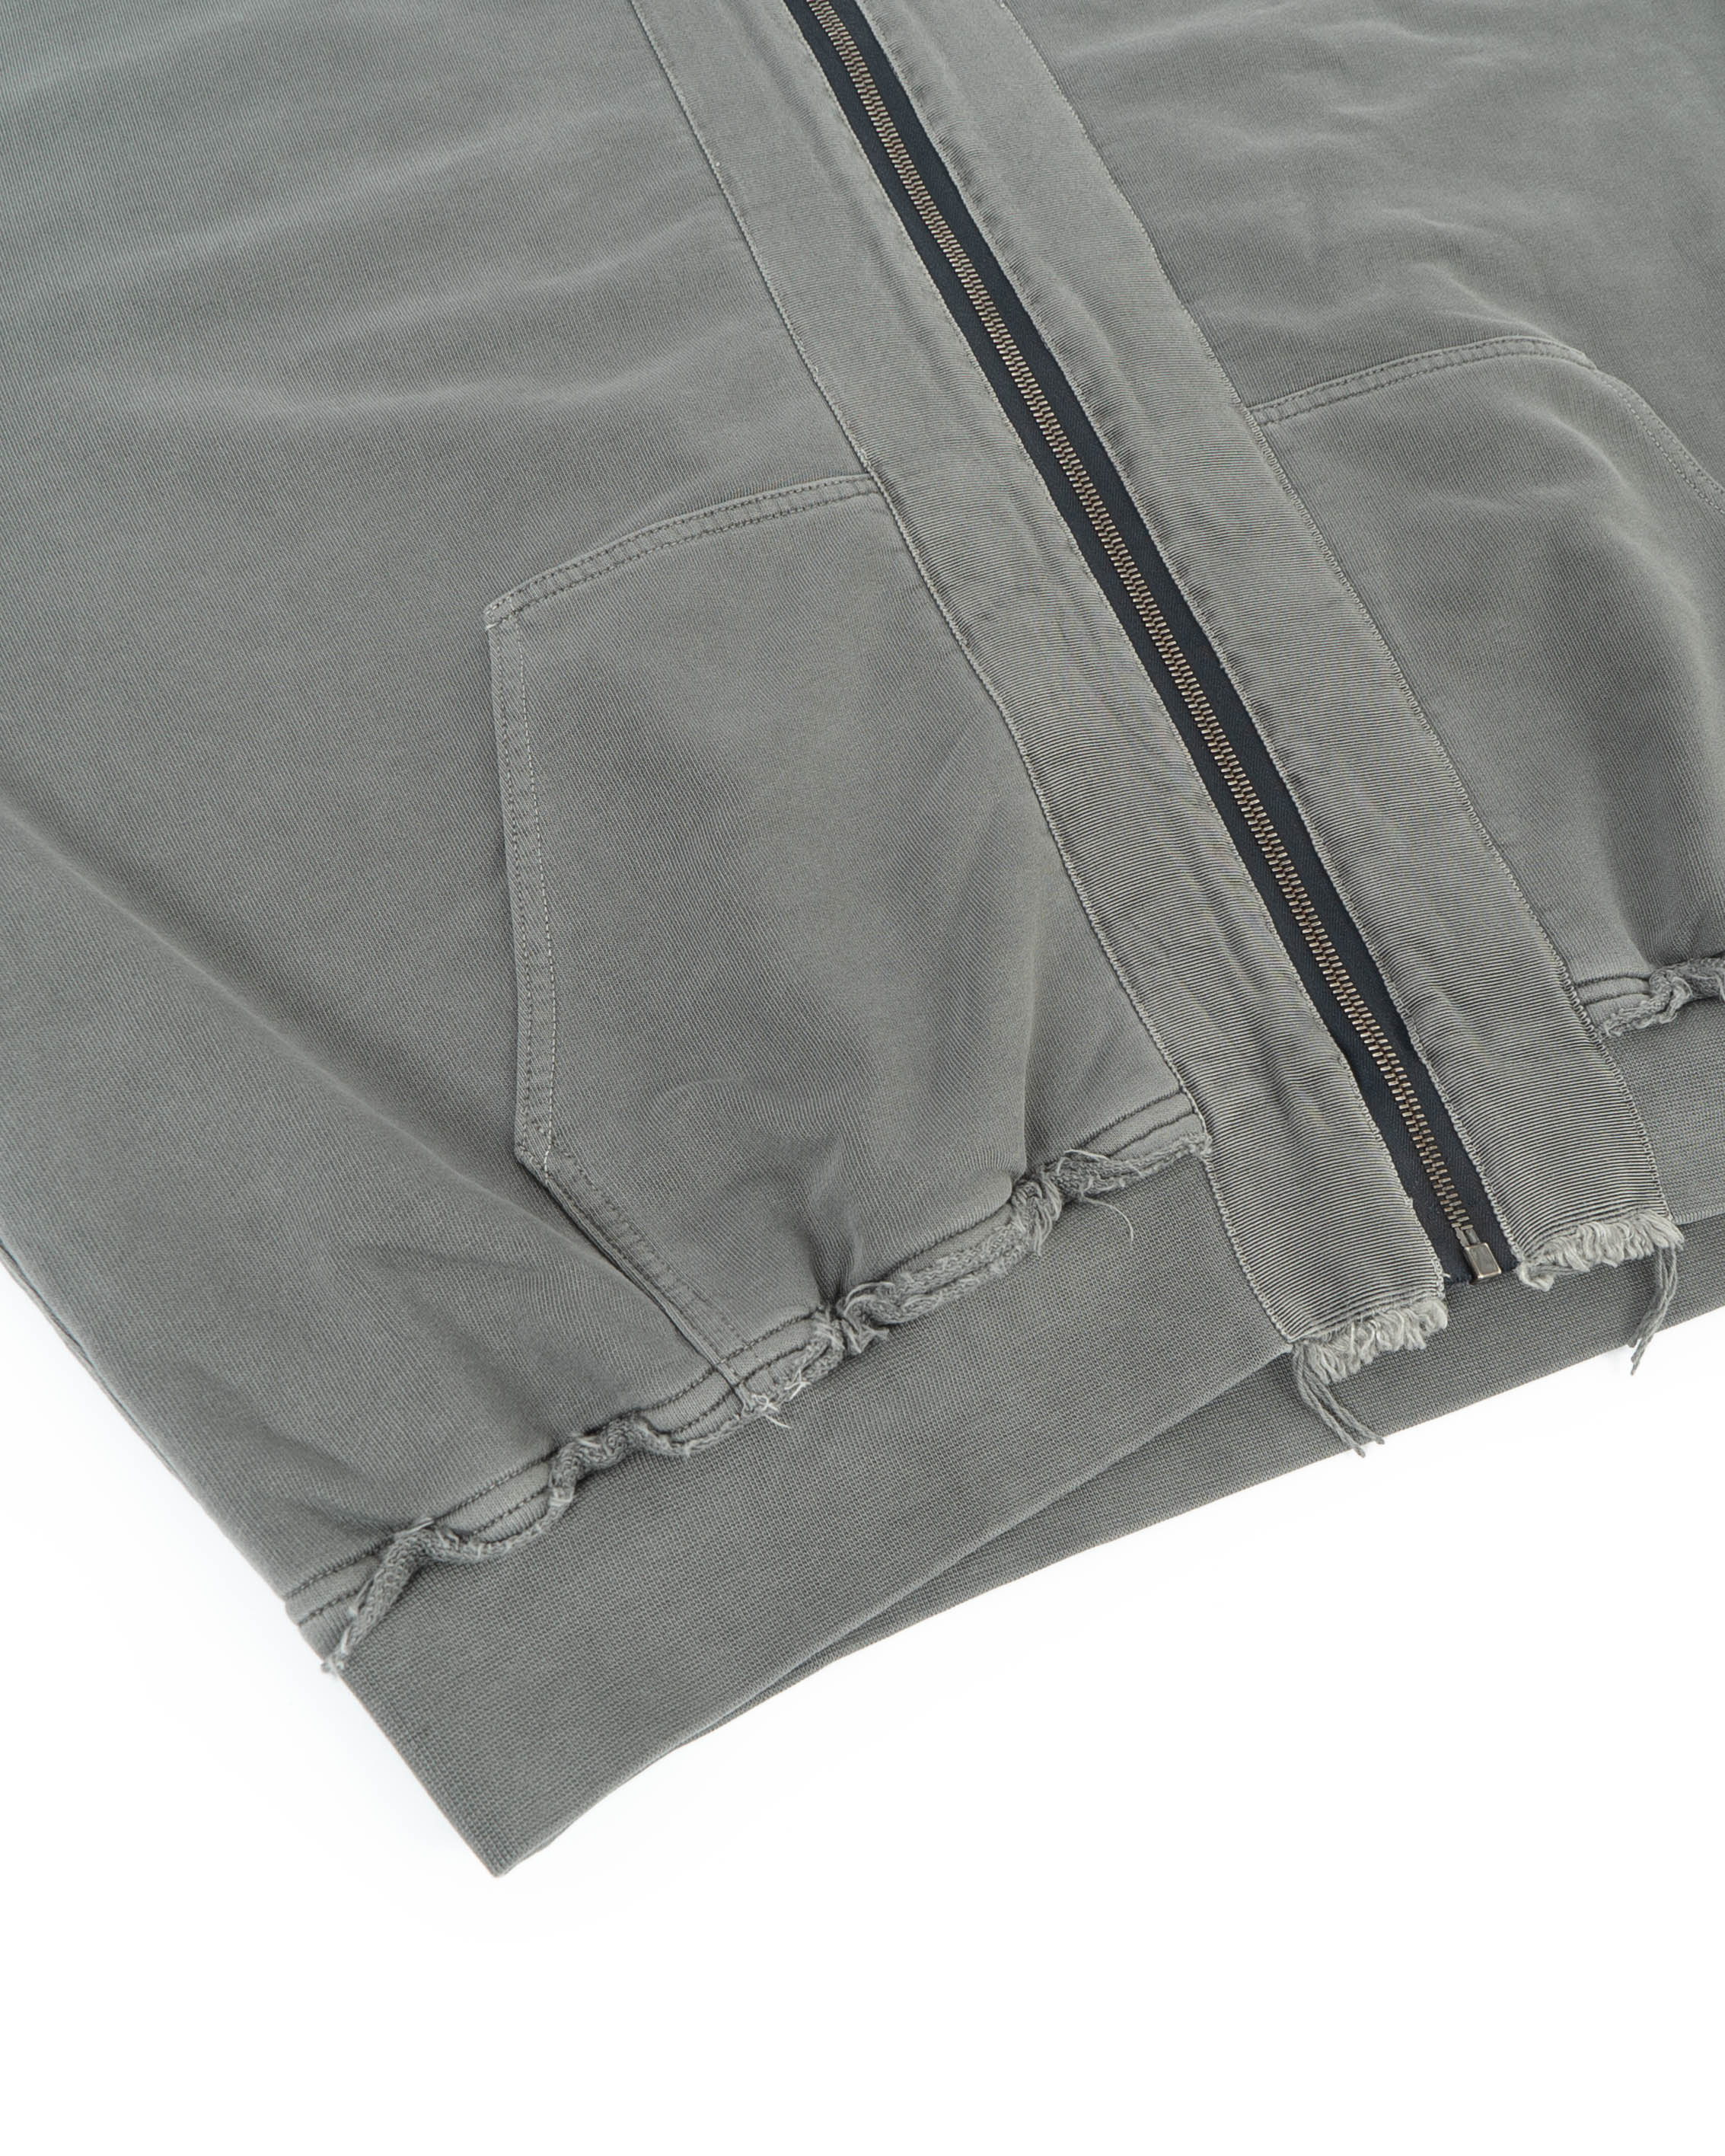 FW14 Washed Grey Double Layer Zip-Up Grey